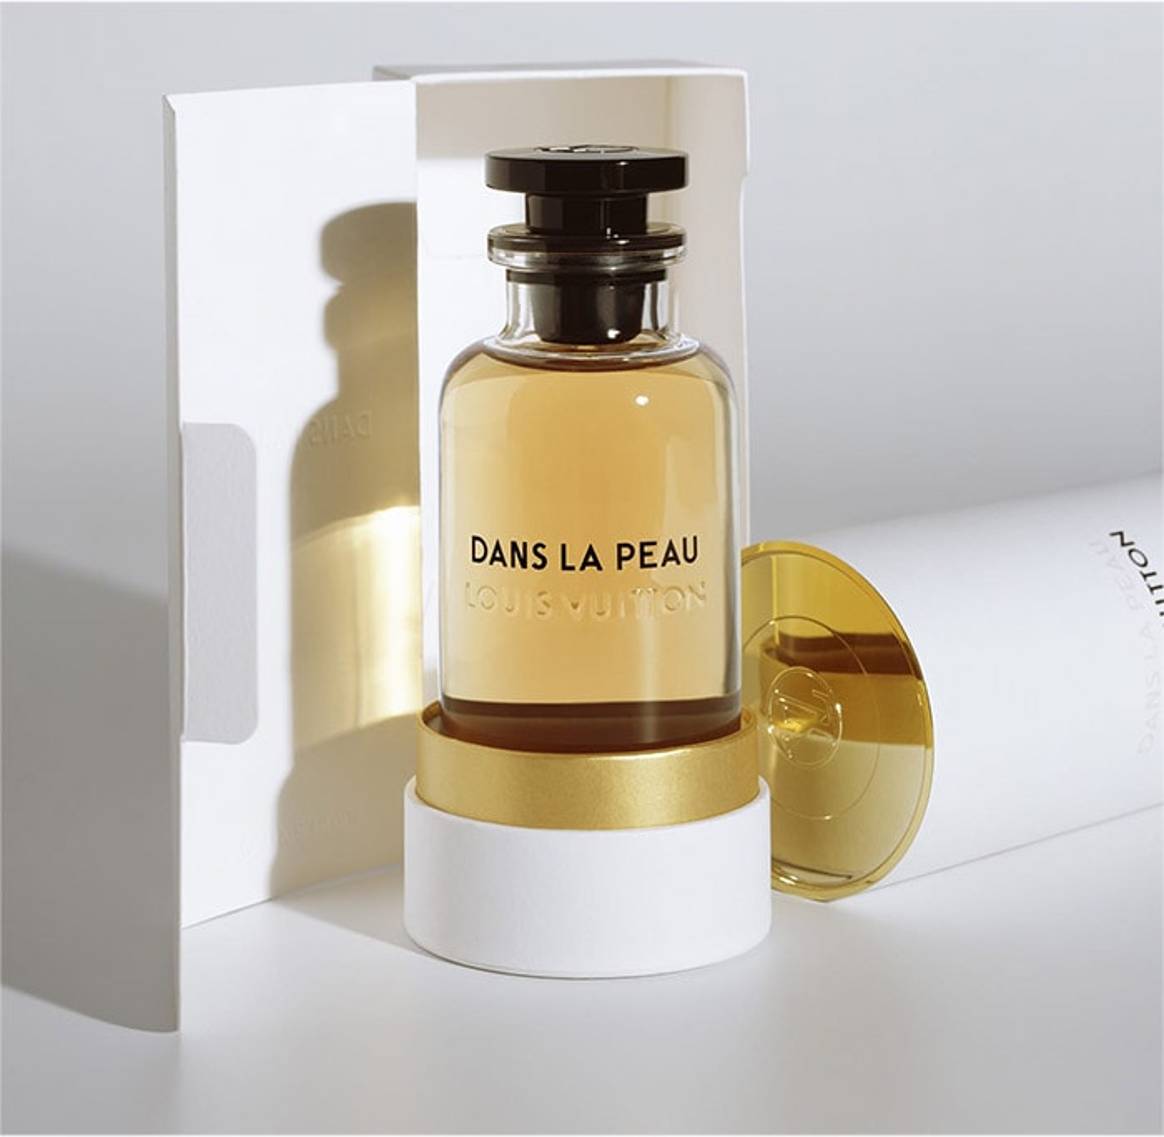 Louis Vuitton launches first perfume range in 70 years